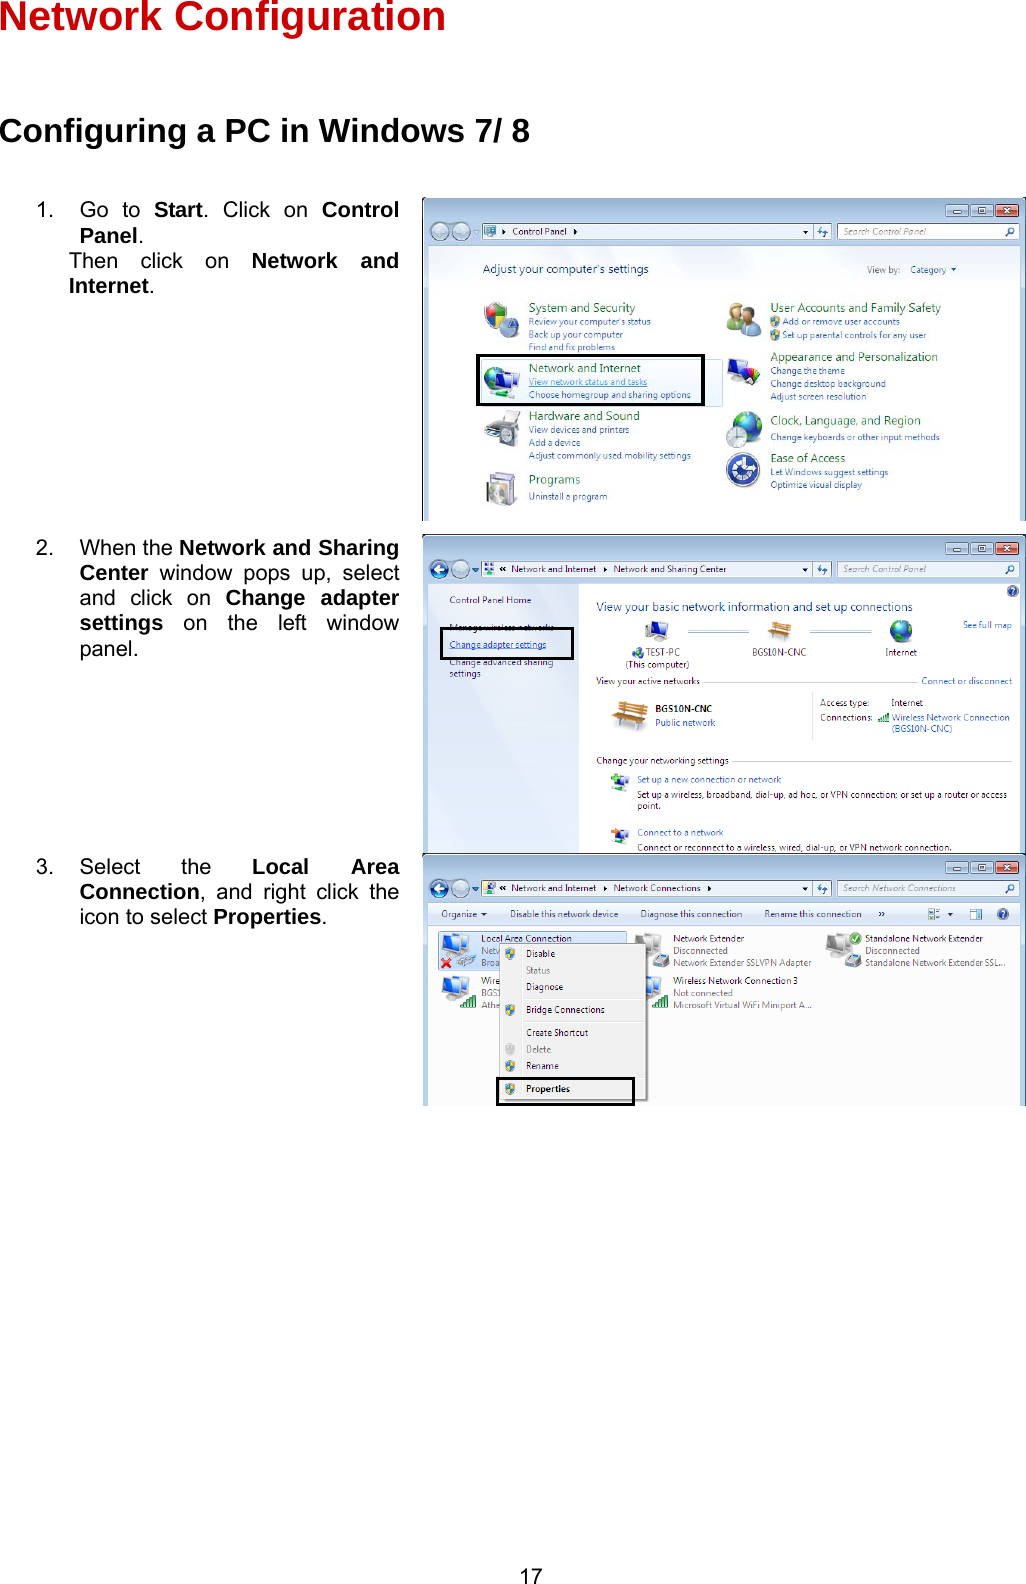  17   Network Configuration  Configuring a PC in Windows 7/ 8                   1. Go to Start. Click on Control Panel. Then click on Network and Internet. 2. When the Network and Sharing Center window pops up, select and click on Change adapter settings on the left window panel. 3. Select  the  Local Area Connection, and right click the icon to select Properties. 